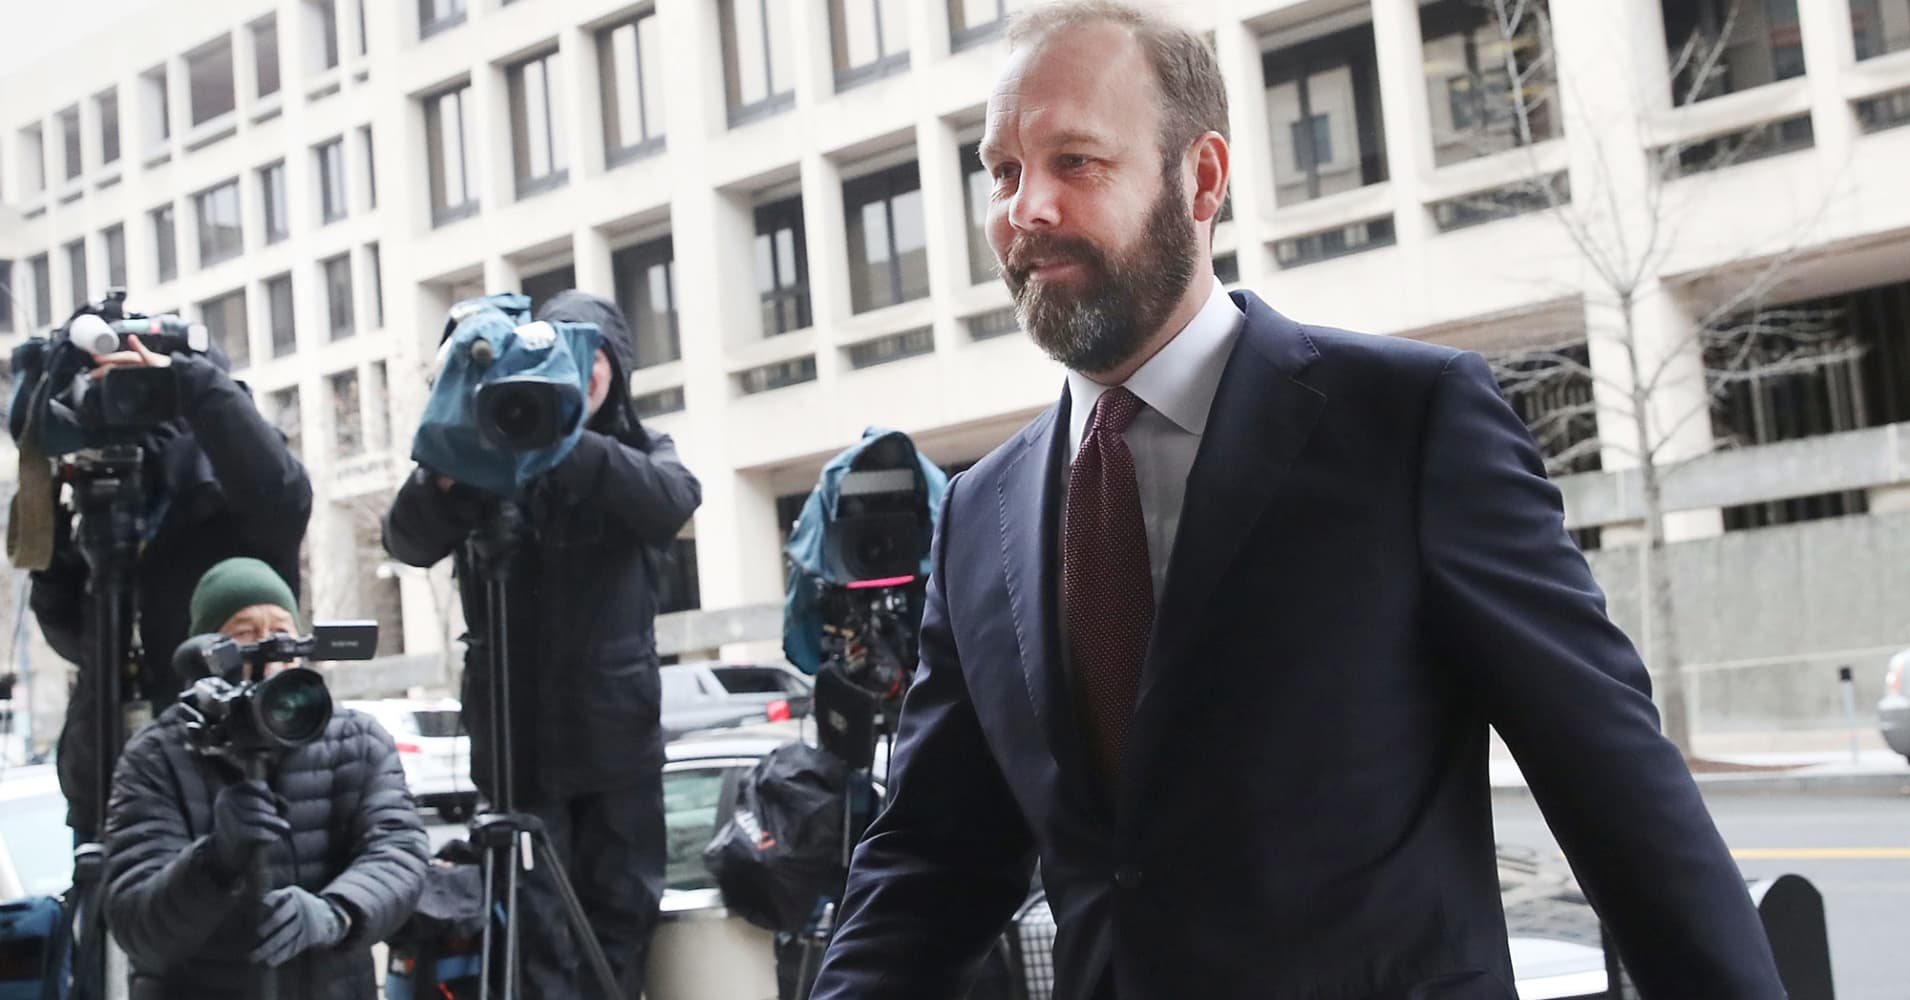 Mueller asks to delay ex-Trump aide Gates' sentencing because he is cooperating in 'several' probes